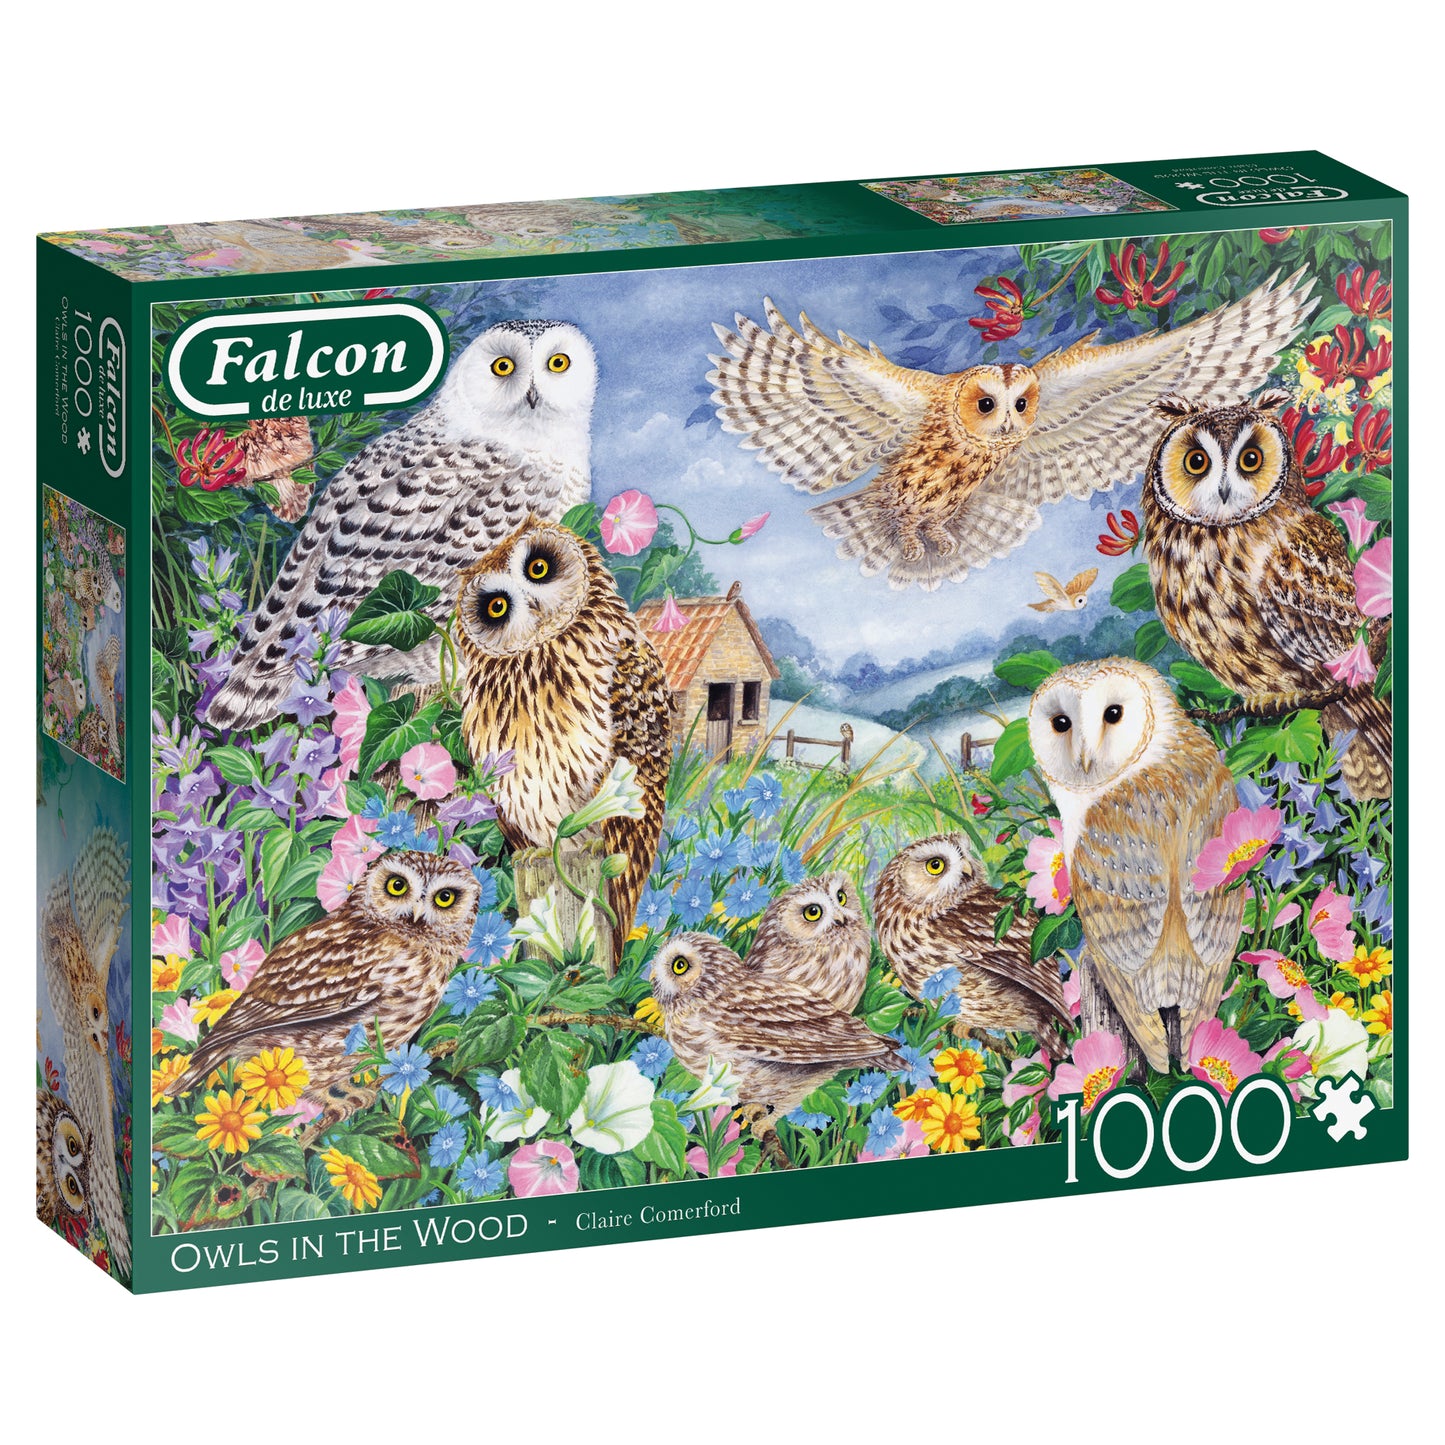 Falcon - Owls in the Wood (1000 pieces) - product image - Jumboplay.com